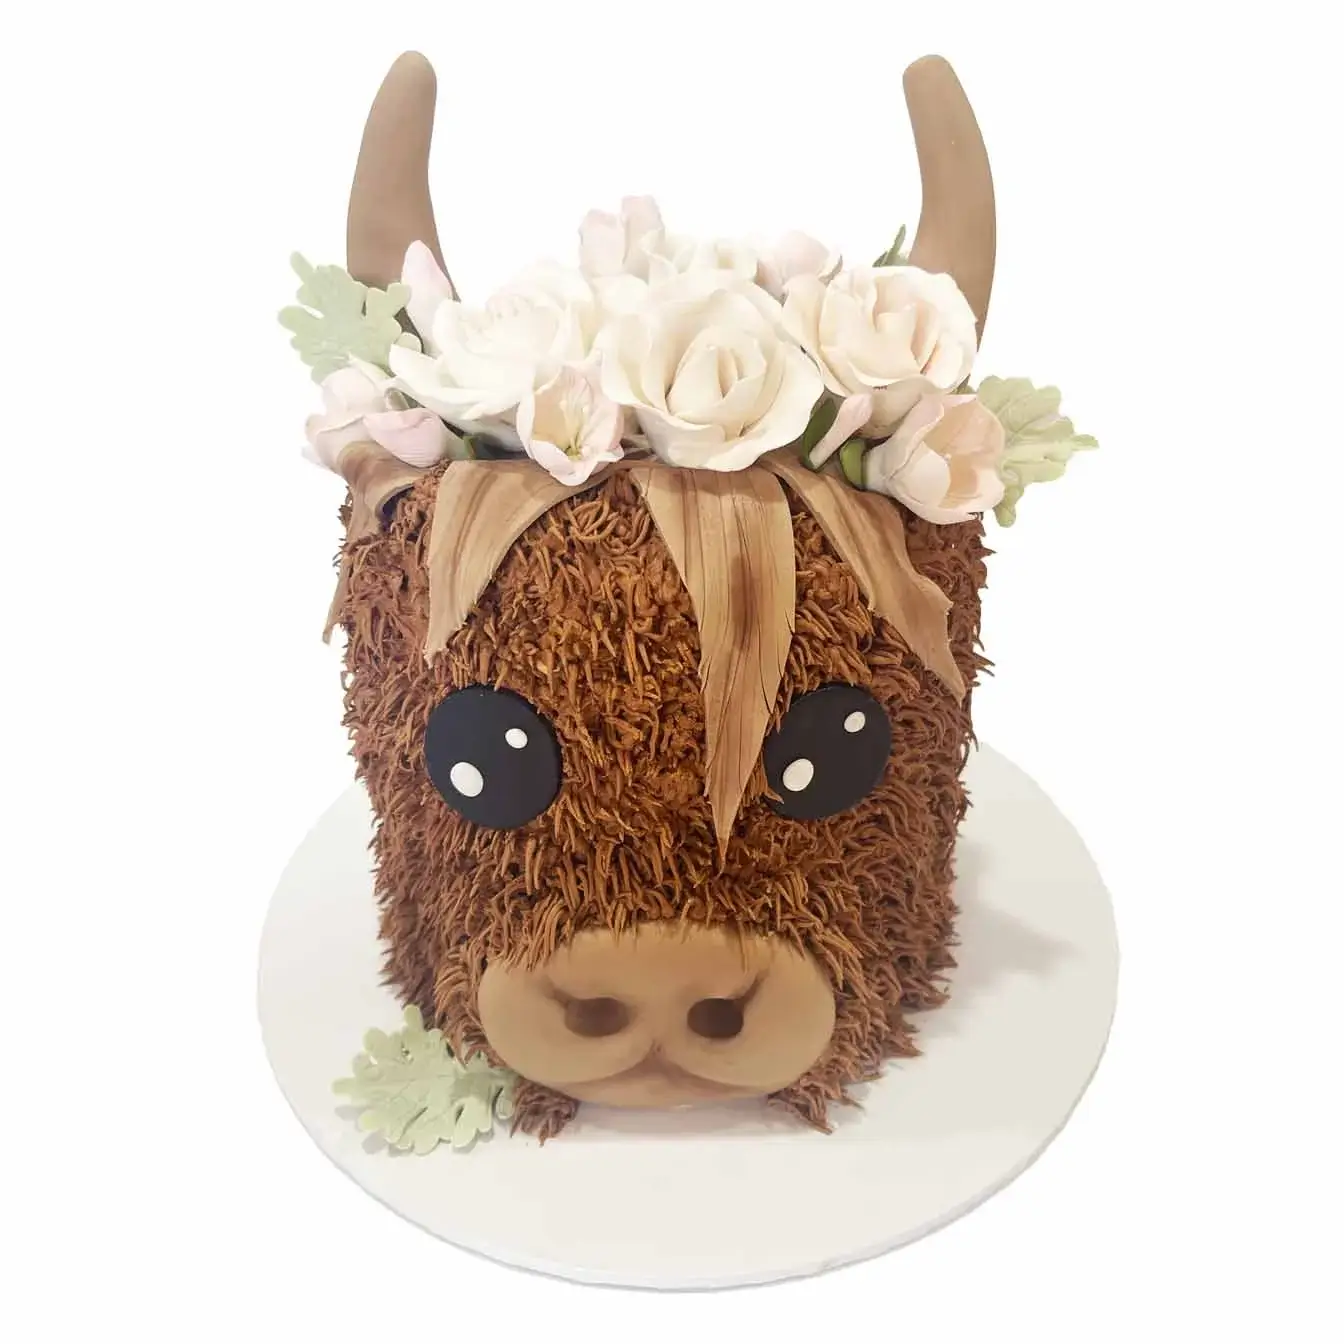 Majestic Highland Cow Cake - A double-height cake with piped fur, fondant facial features, and delicate fondant flowers on its head, reminiscent of the enchanting Scottish Highlands